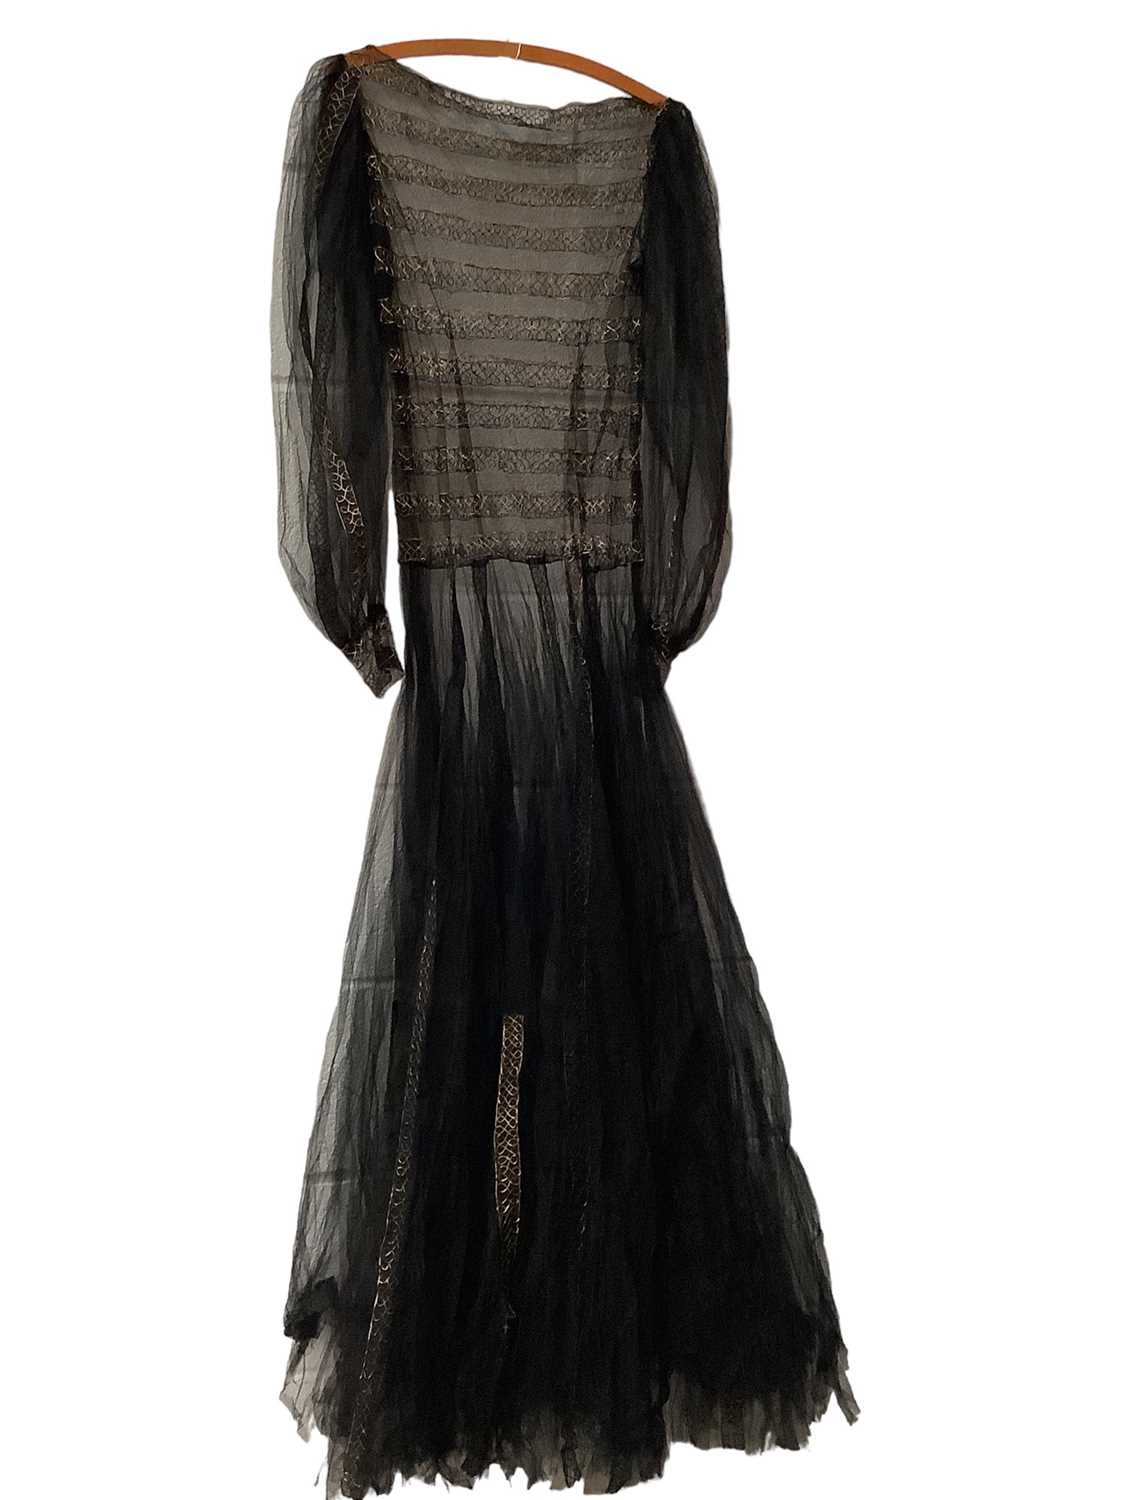 Lot 2052 - Black tulle net evening dress with metallic thread continuous figure of eight embroidery in bands, wide gathered sleeves with narrow cuffs, voluminous gathered skirt. Plus a white layered tulle net...